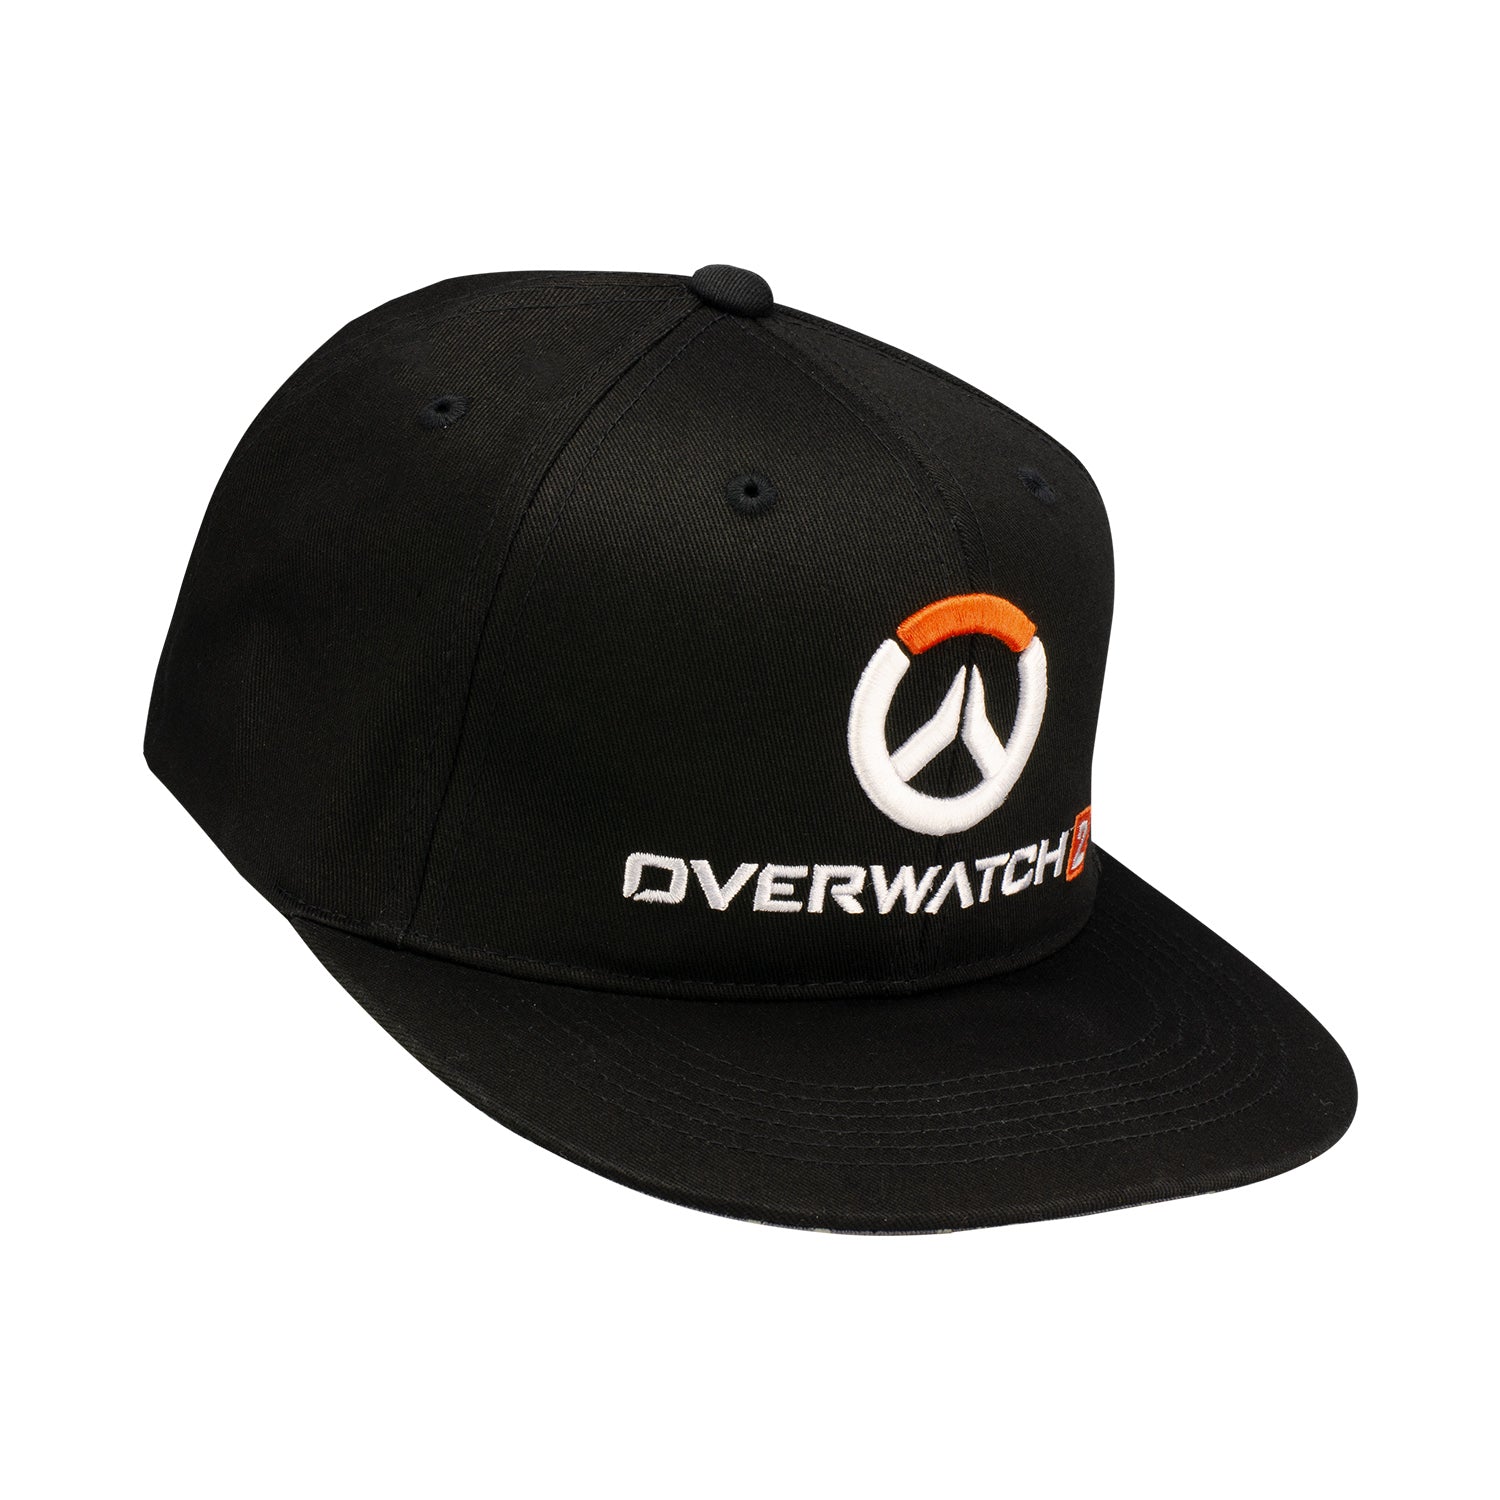 Overwatch 2 Black Flatbill Snapback Hat - Front Right Side View